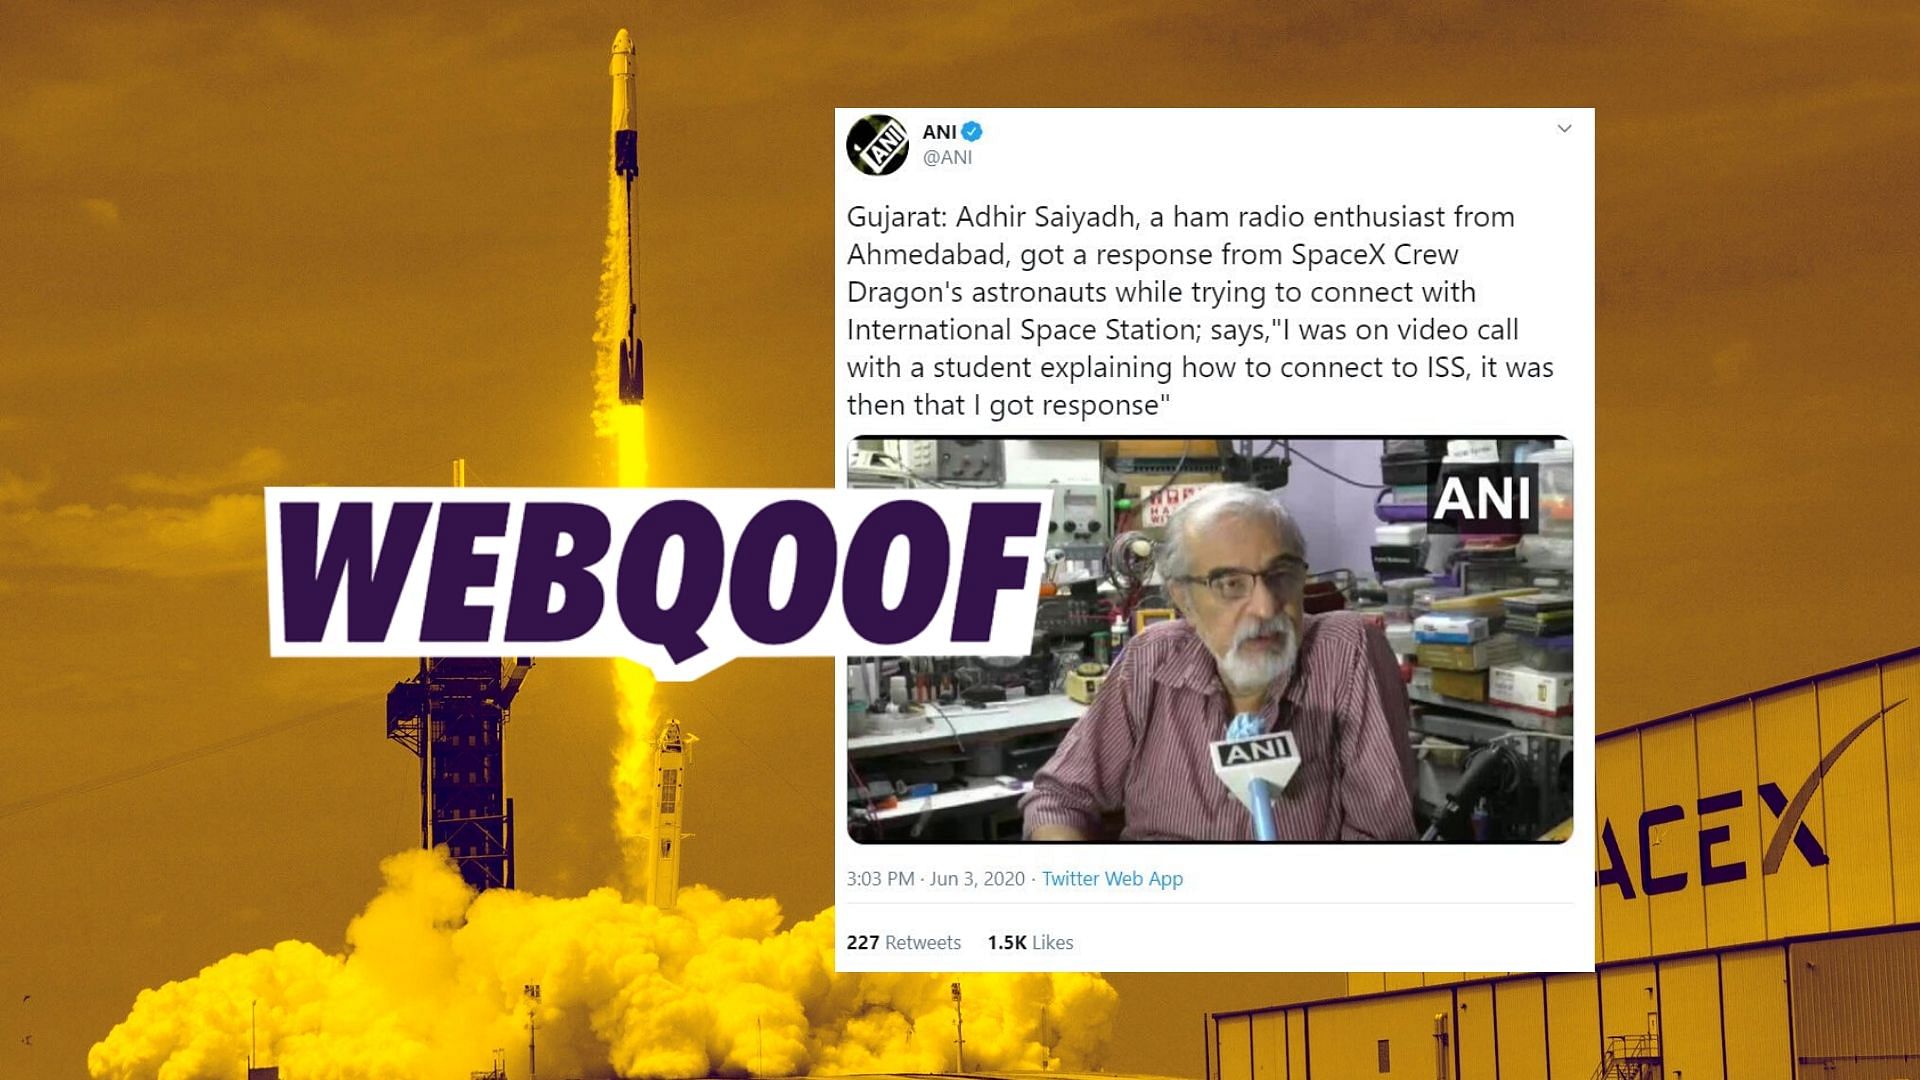 Adhir Saiyadh – a ham radio enthusiast from Ahmedabad claimed that he got a response from SpaceX Crew Dragon’s astronauts while trying to connect with International Space Station.